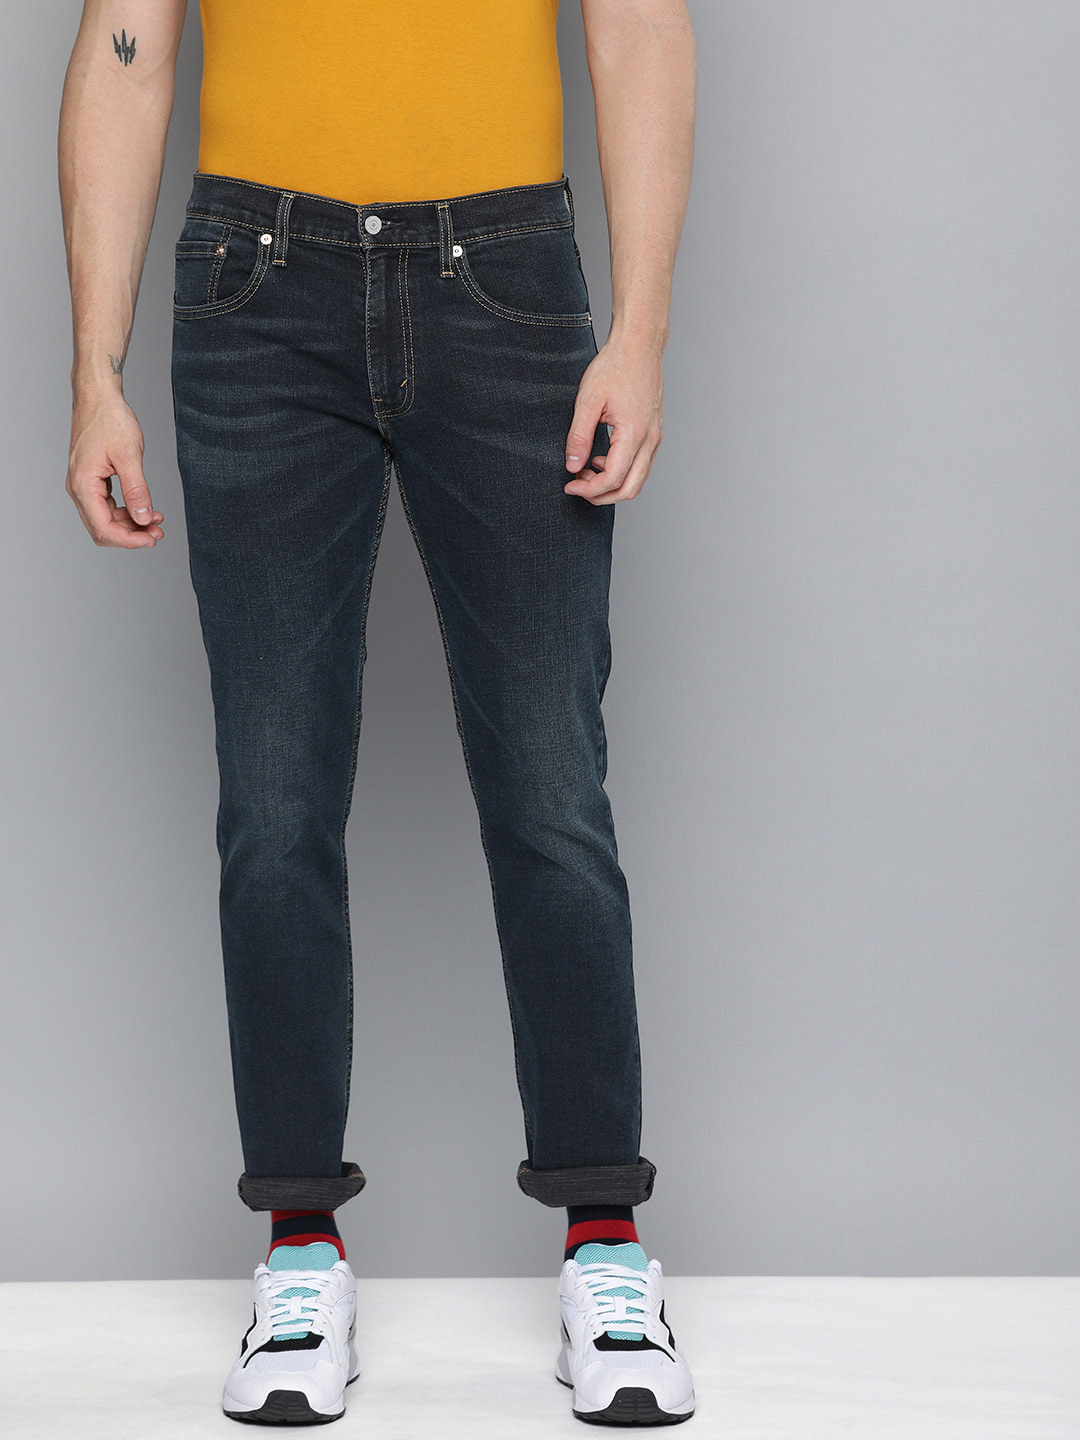 Levis 65504 skinny fit solid navy jeans 